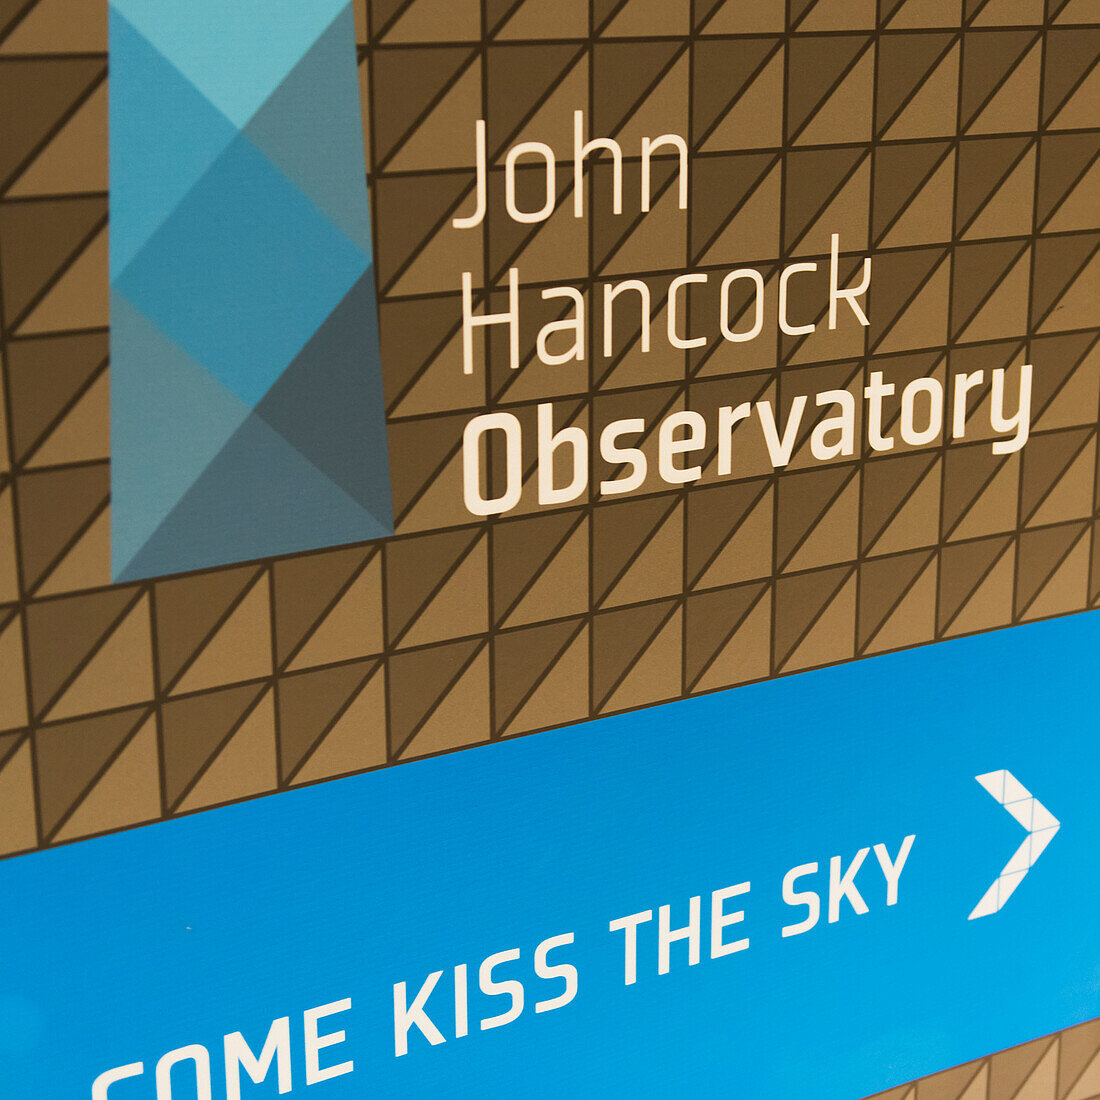 Sign For The John Hancock Observatory; Chicago Illinois United States Of America